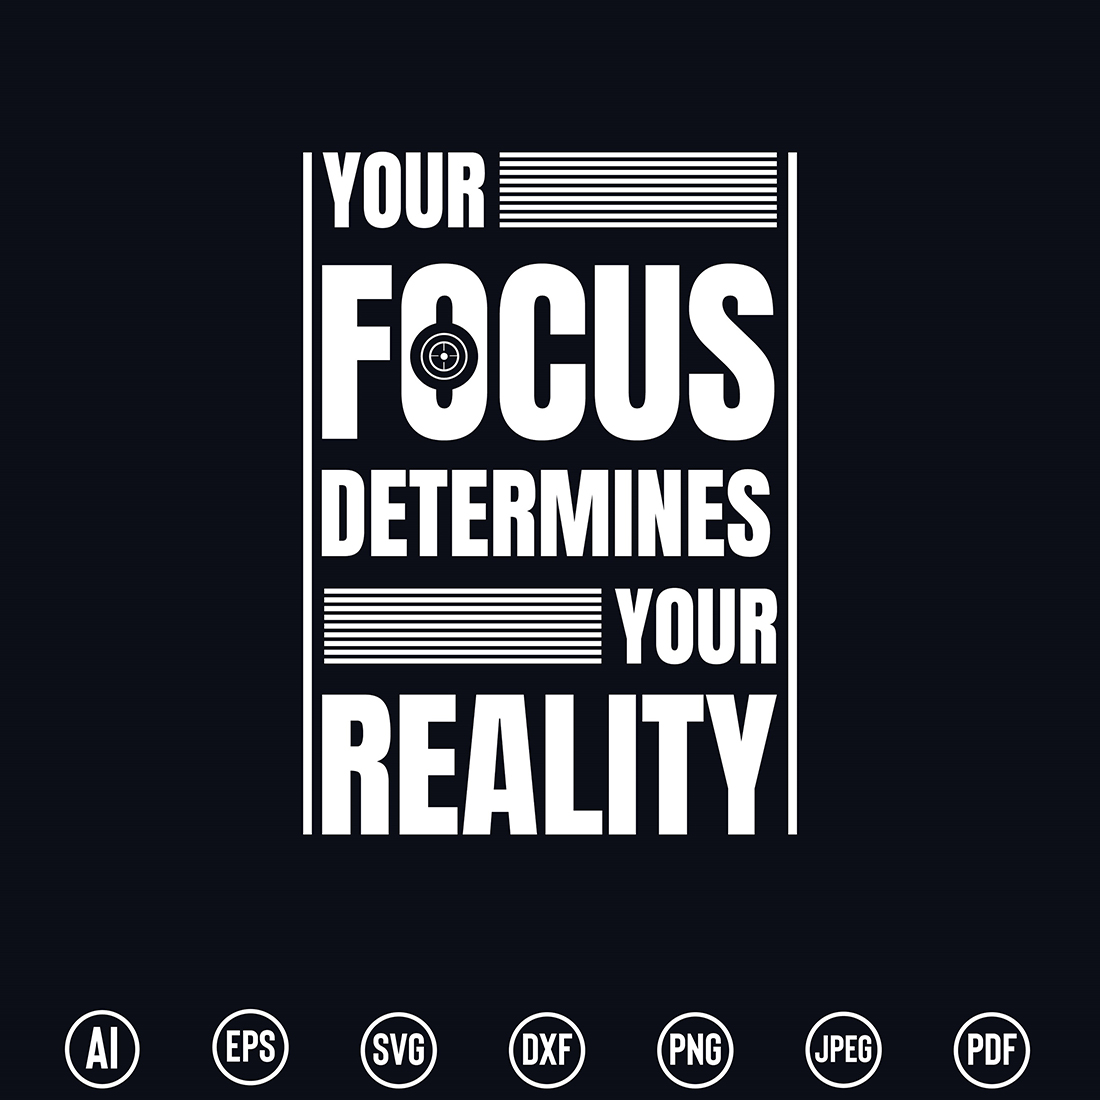 Modern Typography T-Shirt design with “Your Focus Determines Your Reality” quote for t-shirt, posters, stickers, mug prints, banners, gift cards, labels etc preview image.